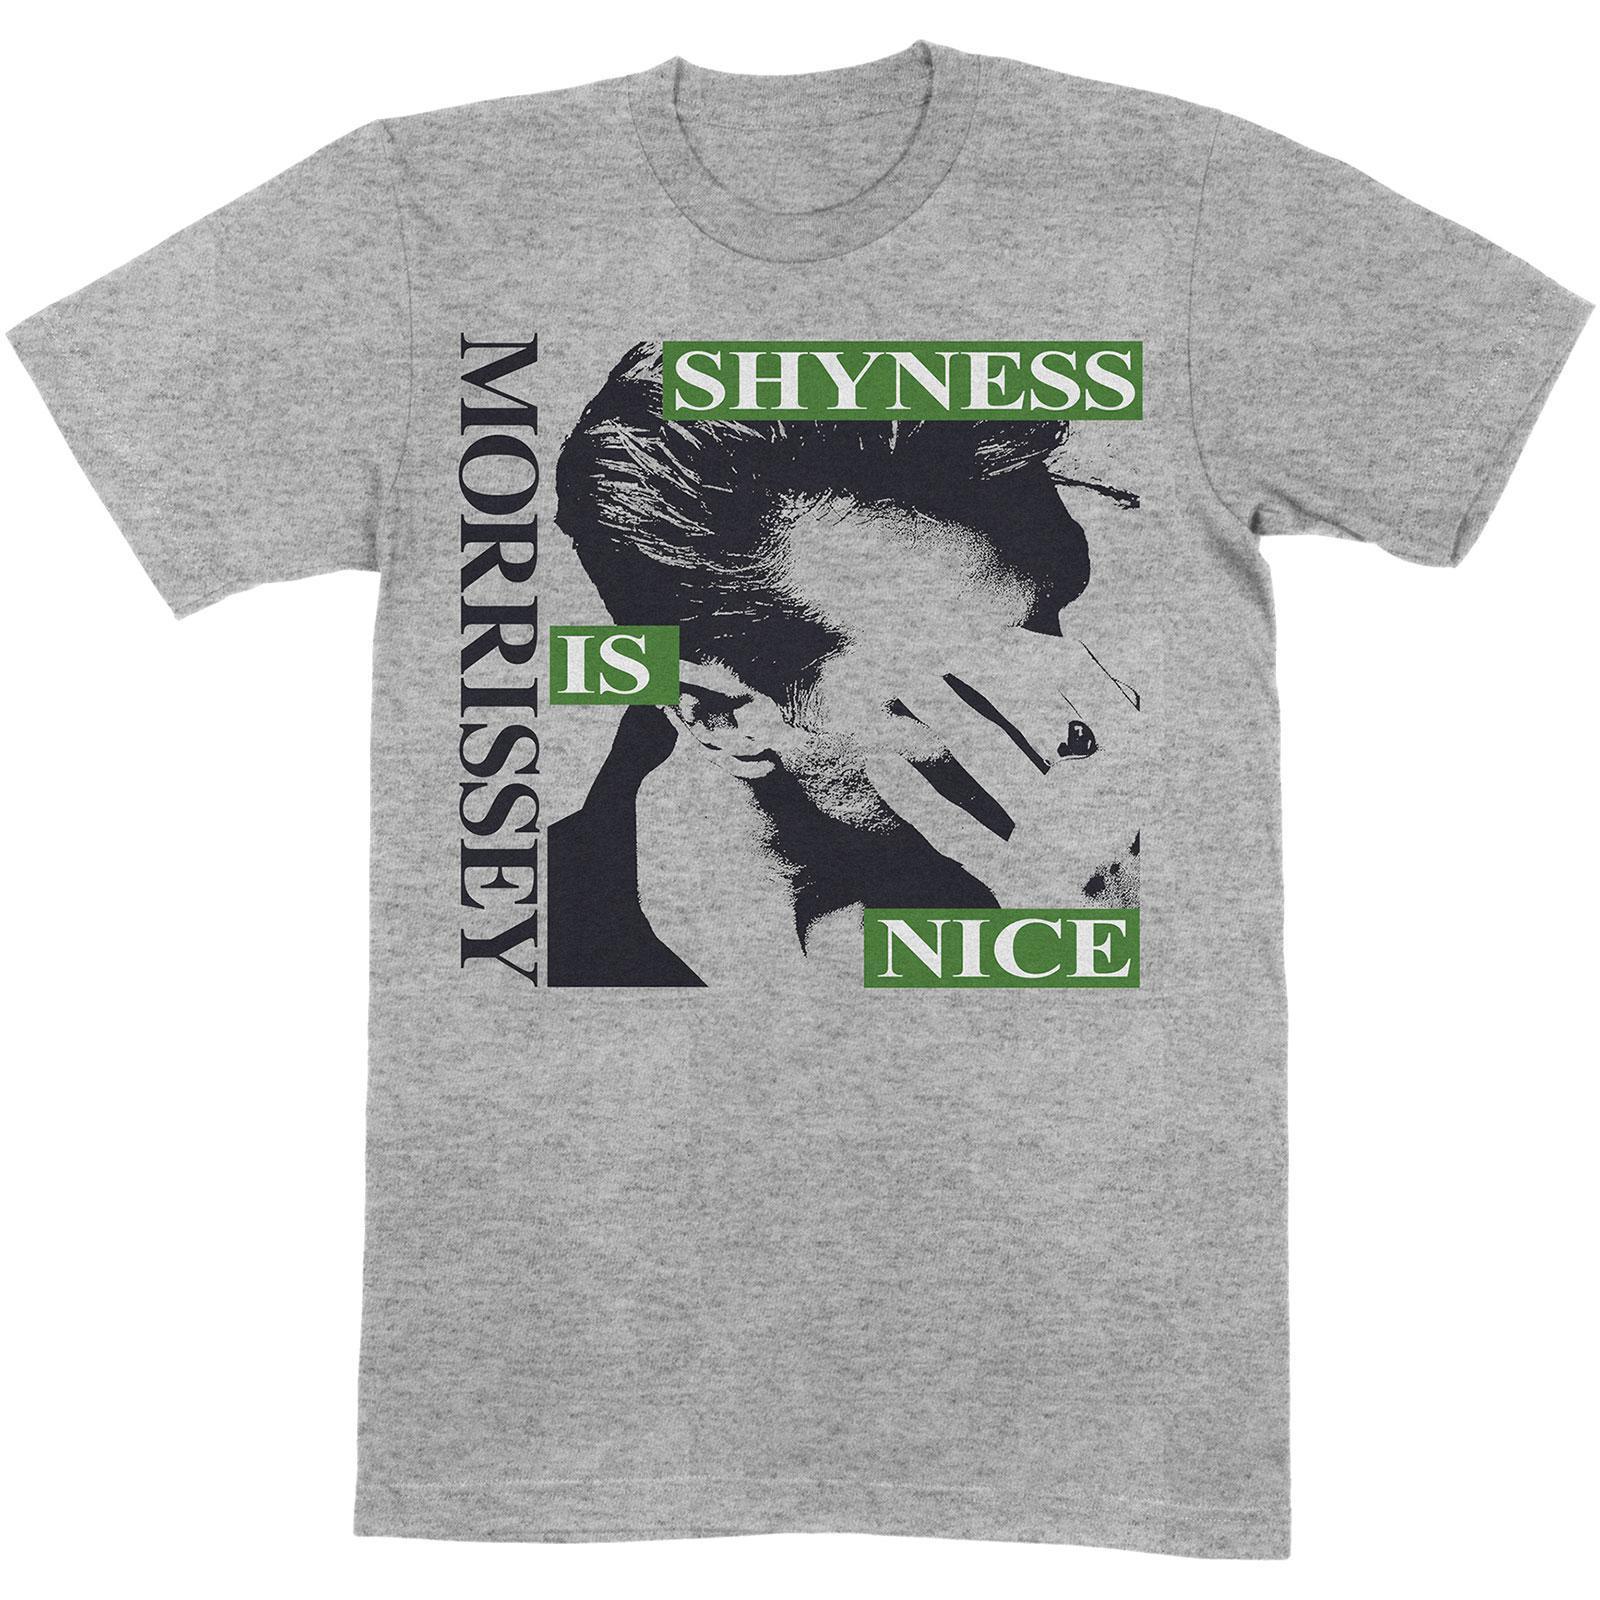 Morrissey Unisex Adult Shyness Is Nice Cotton T-Shirt (Grey) (S)